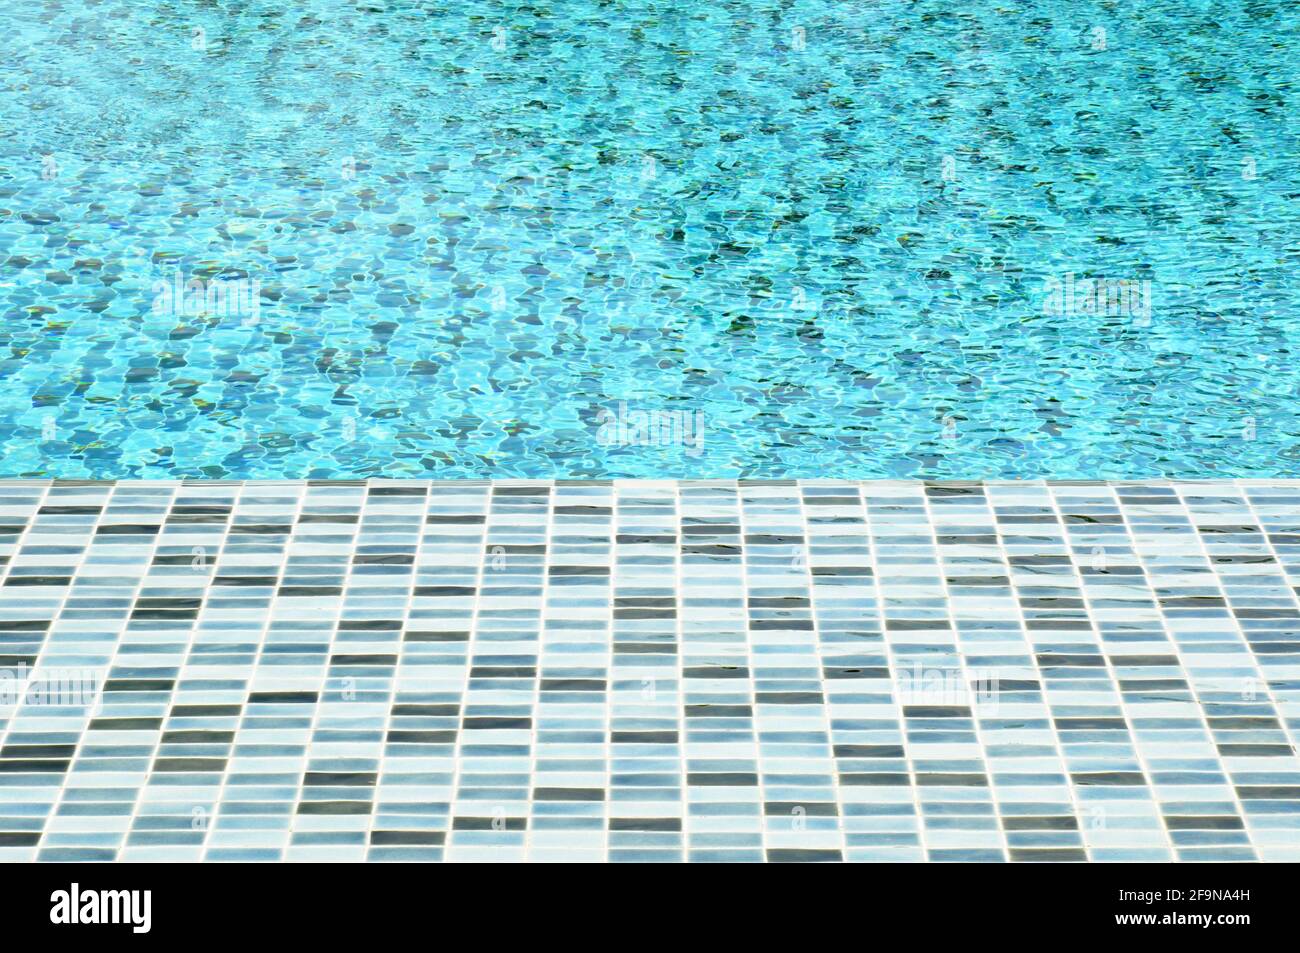 Page 8 - Pool Edge High Resolution Stock Photography and Images - Alamy